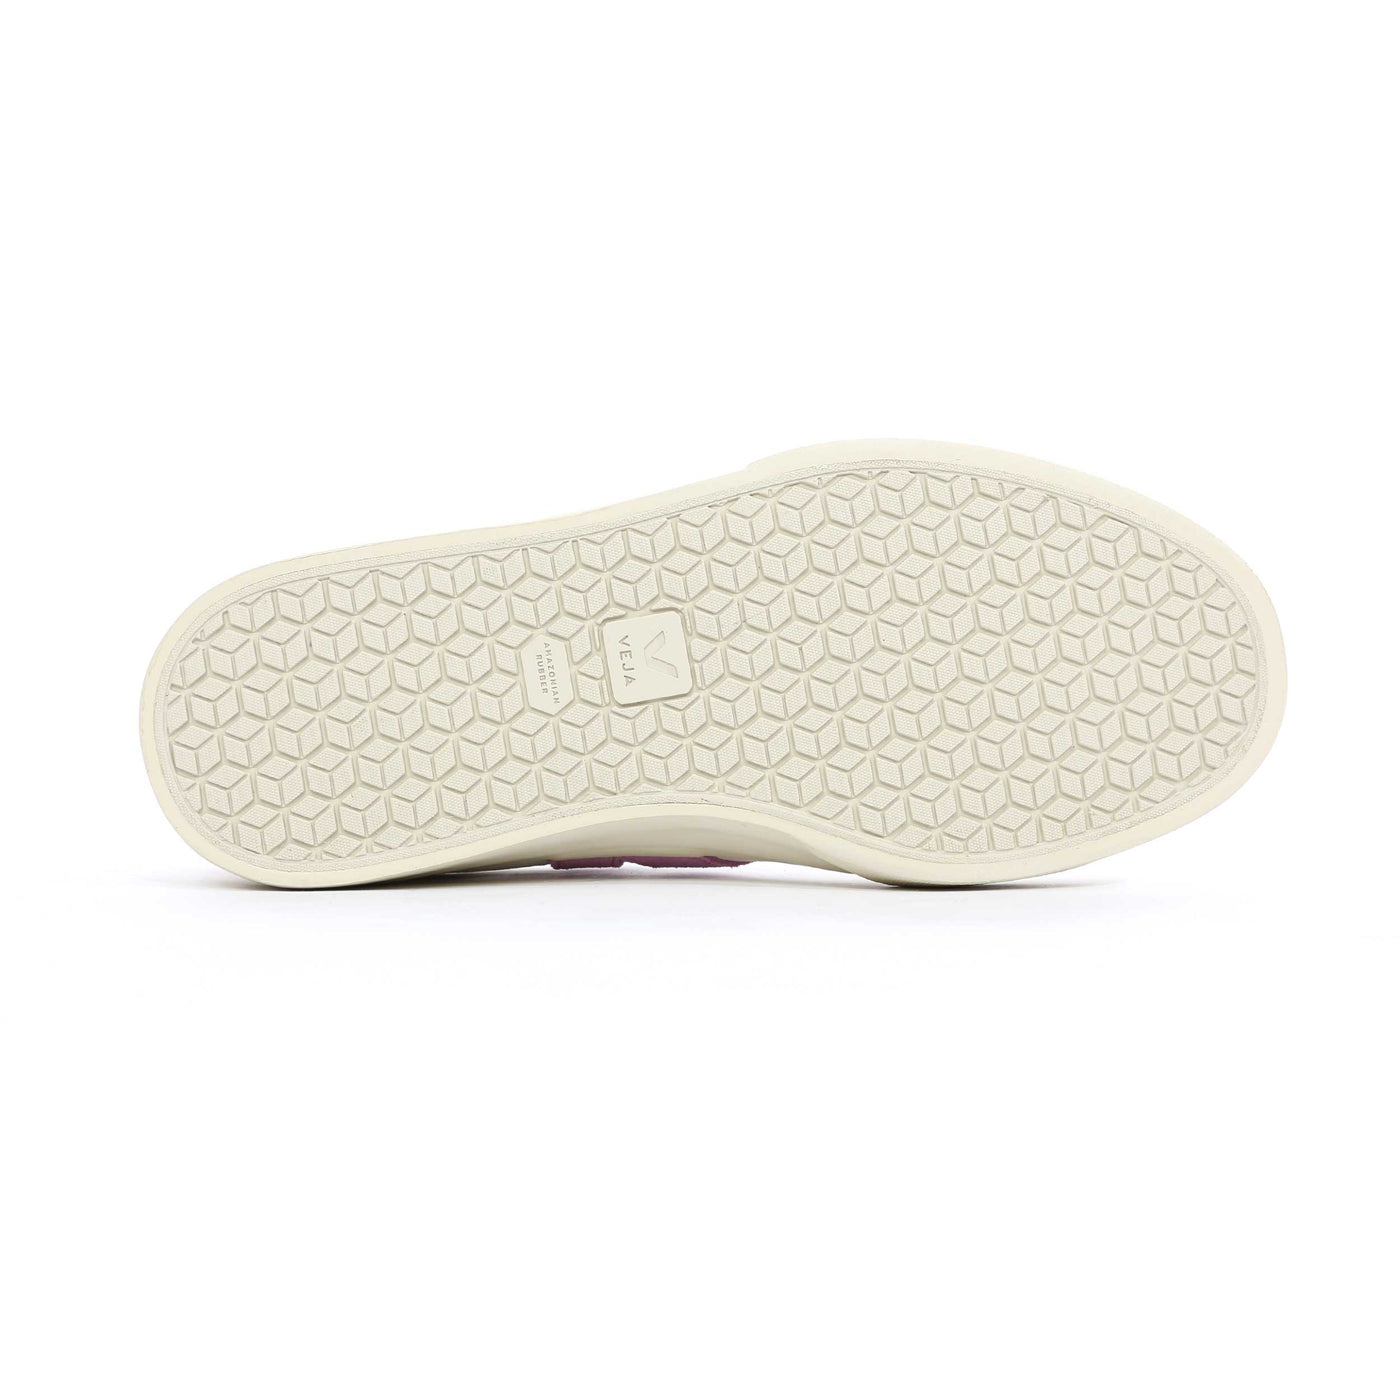 Veja Campo Ladies Trainer in Extra White & Mulberry Sole